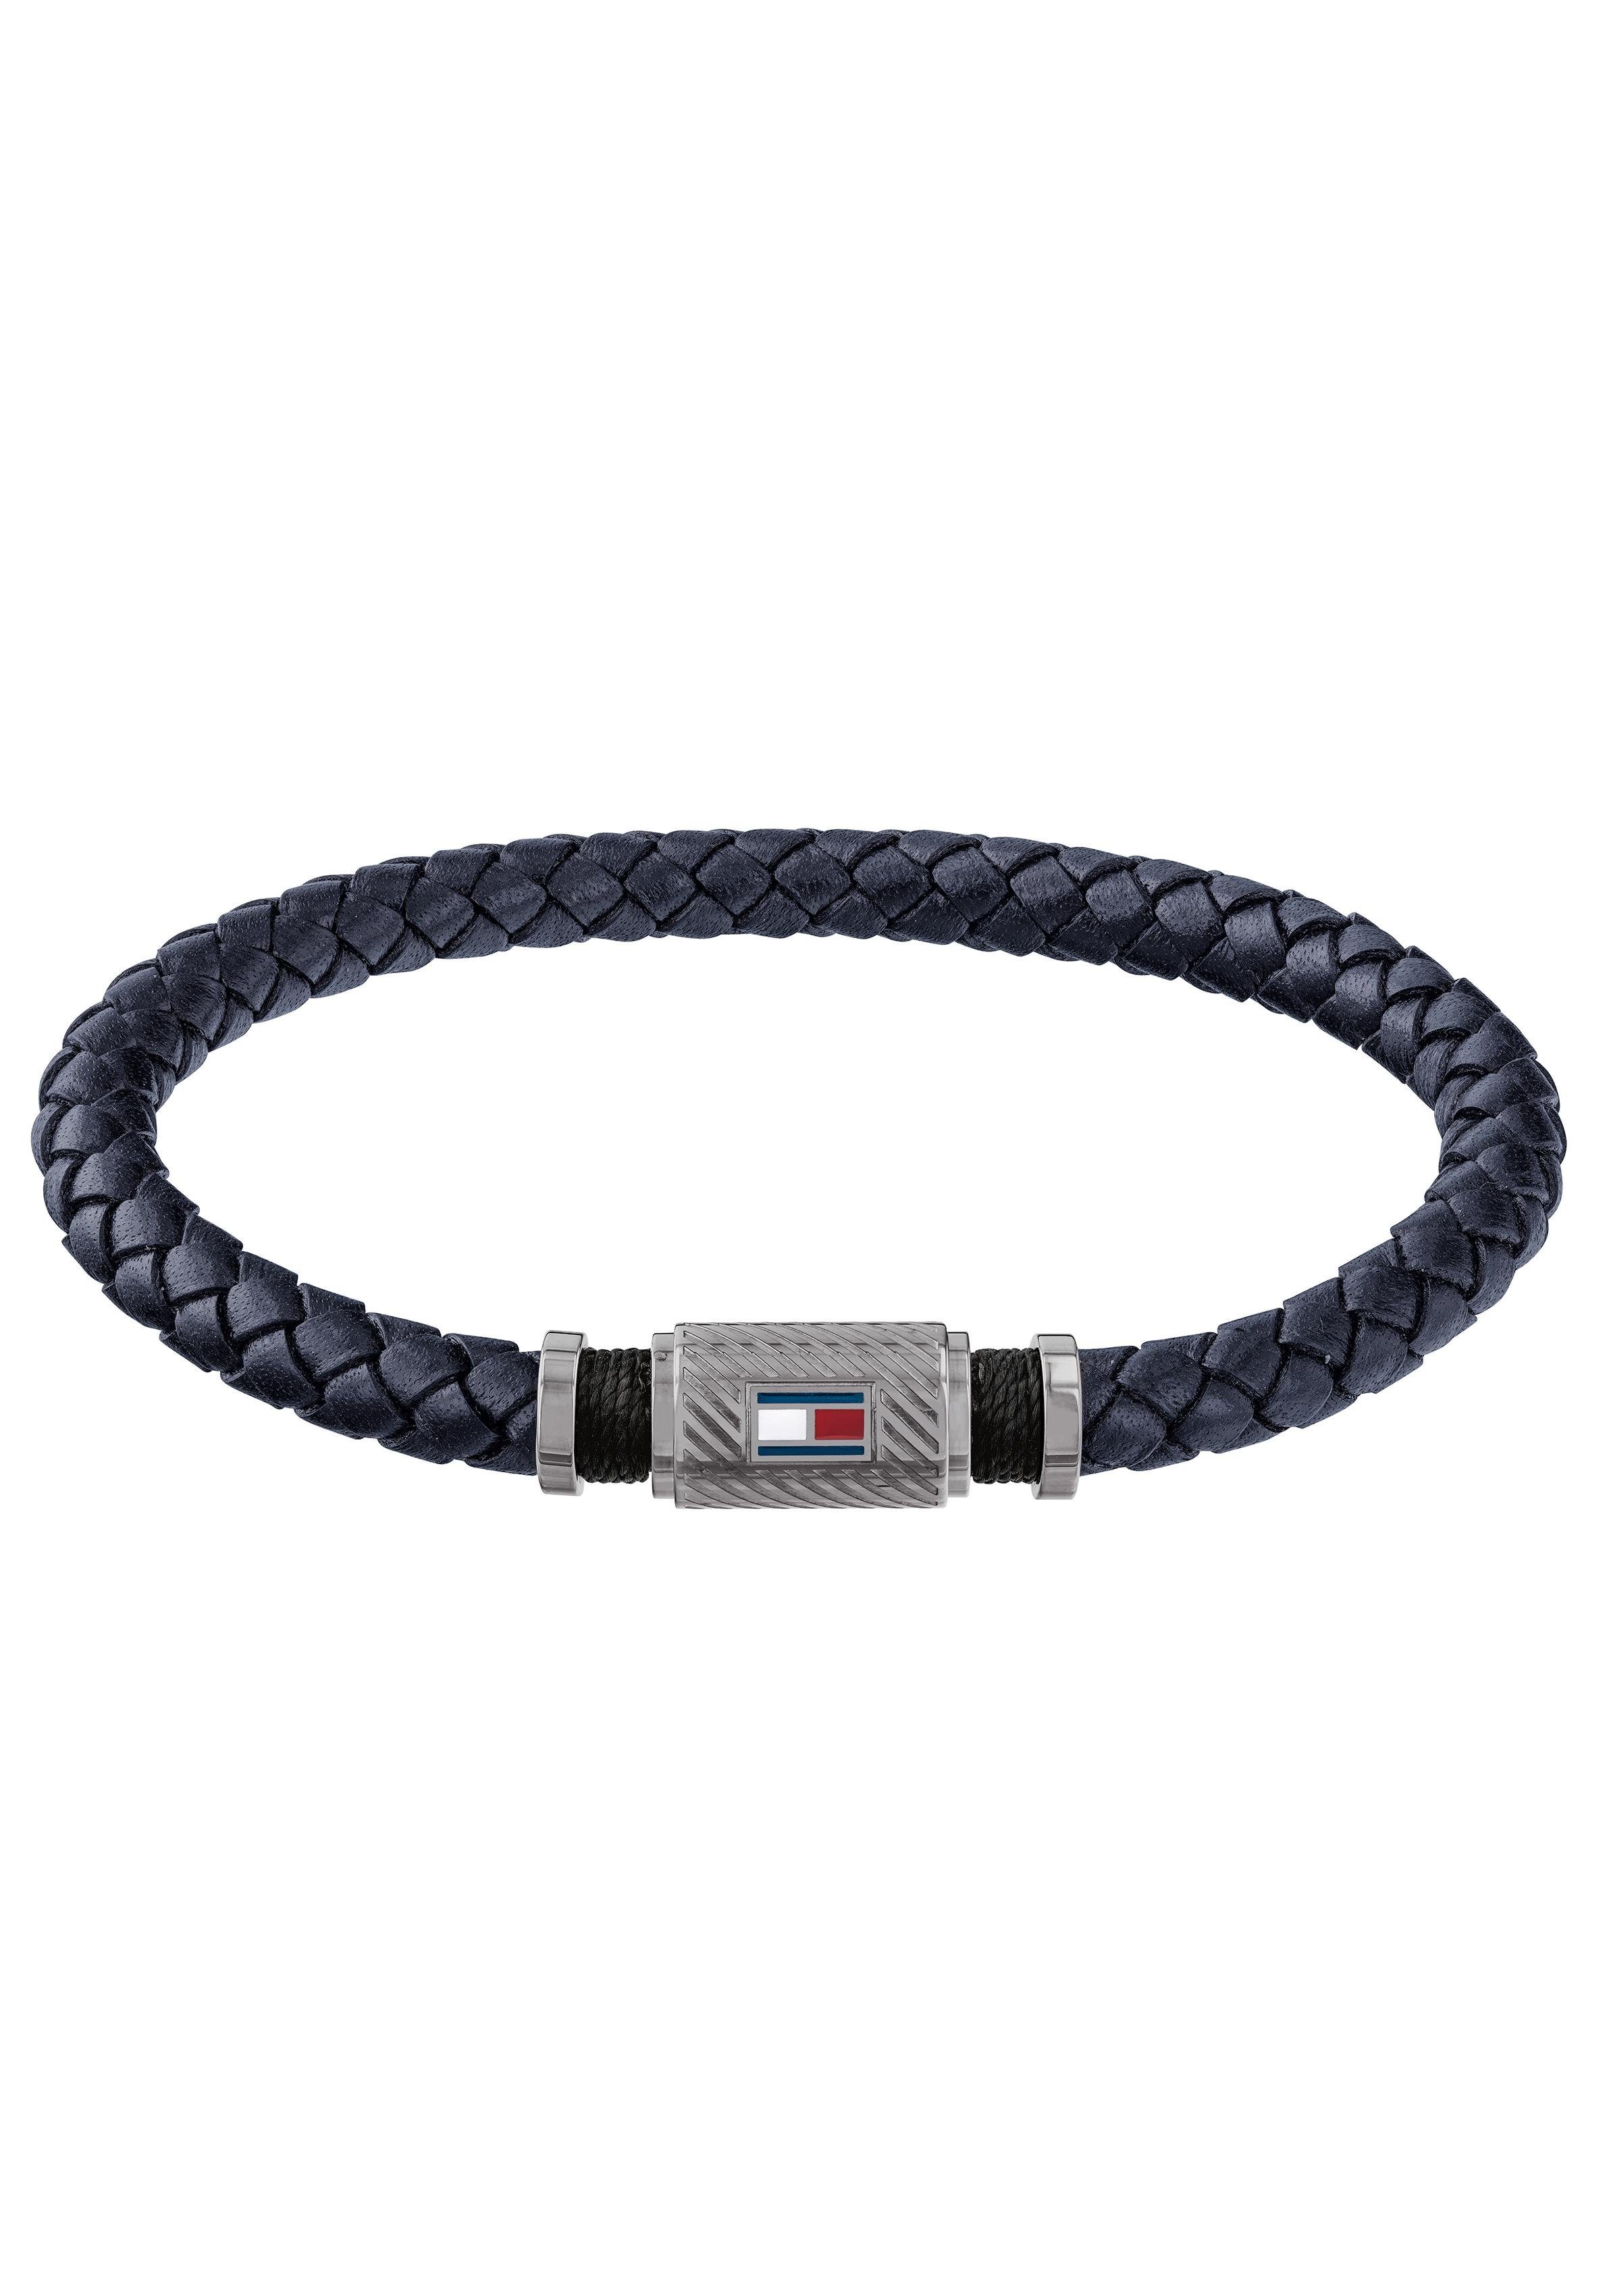 Tommy Hilfiger Armband »CASUAL CORE, 2790083«, mit Emaille online kaufen |  OTTO